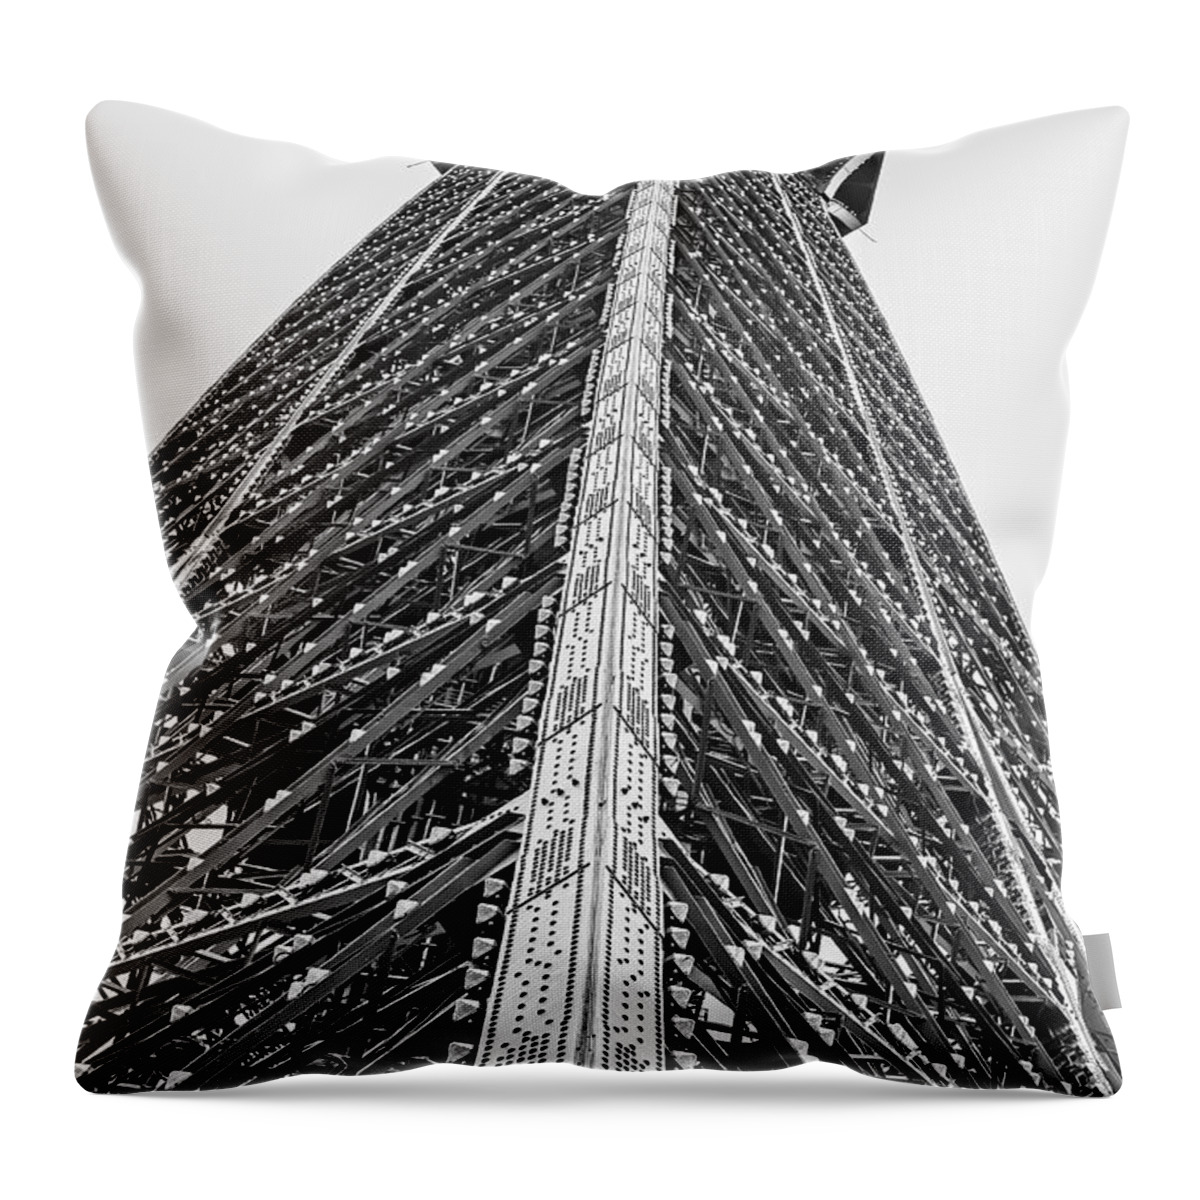 Travel Throw Pillow featuring the photograph Eiffel Tower by Elvis Vaughn